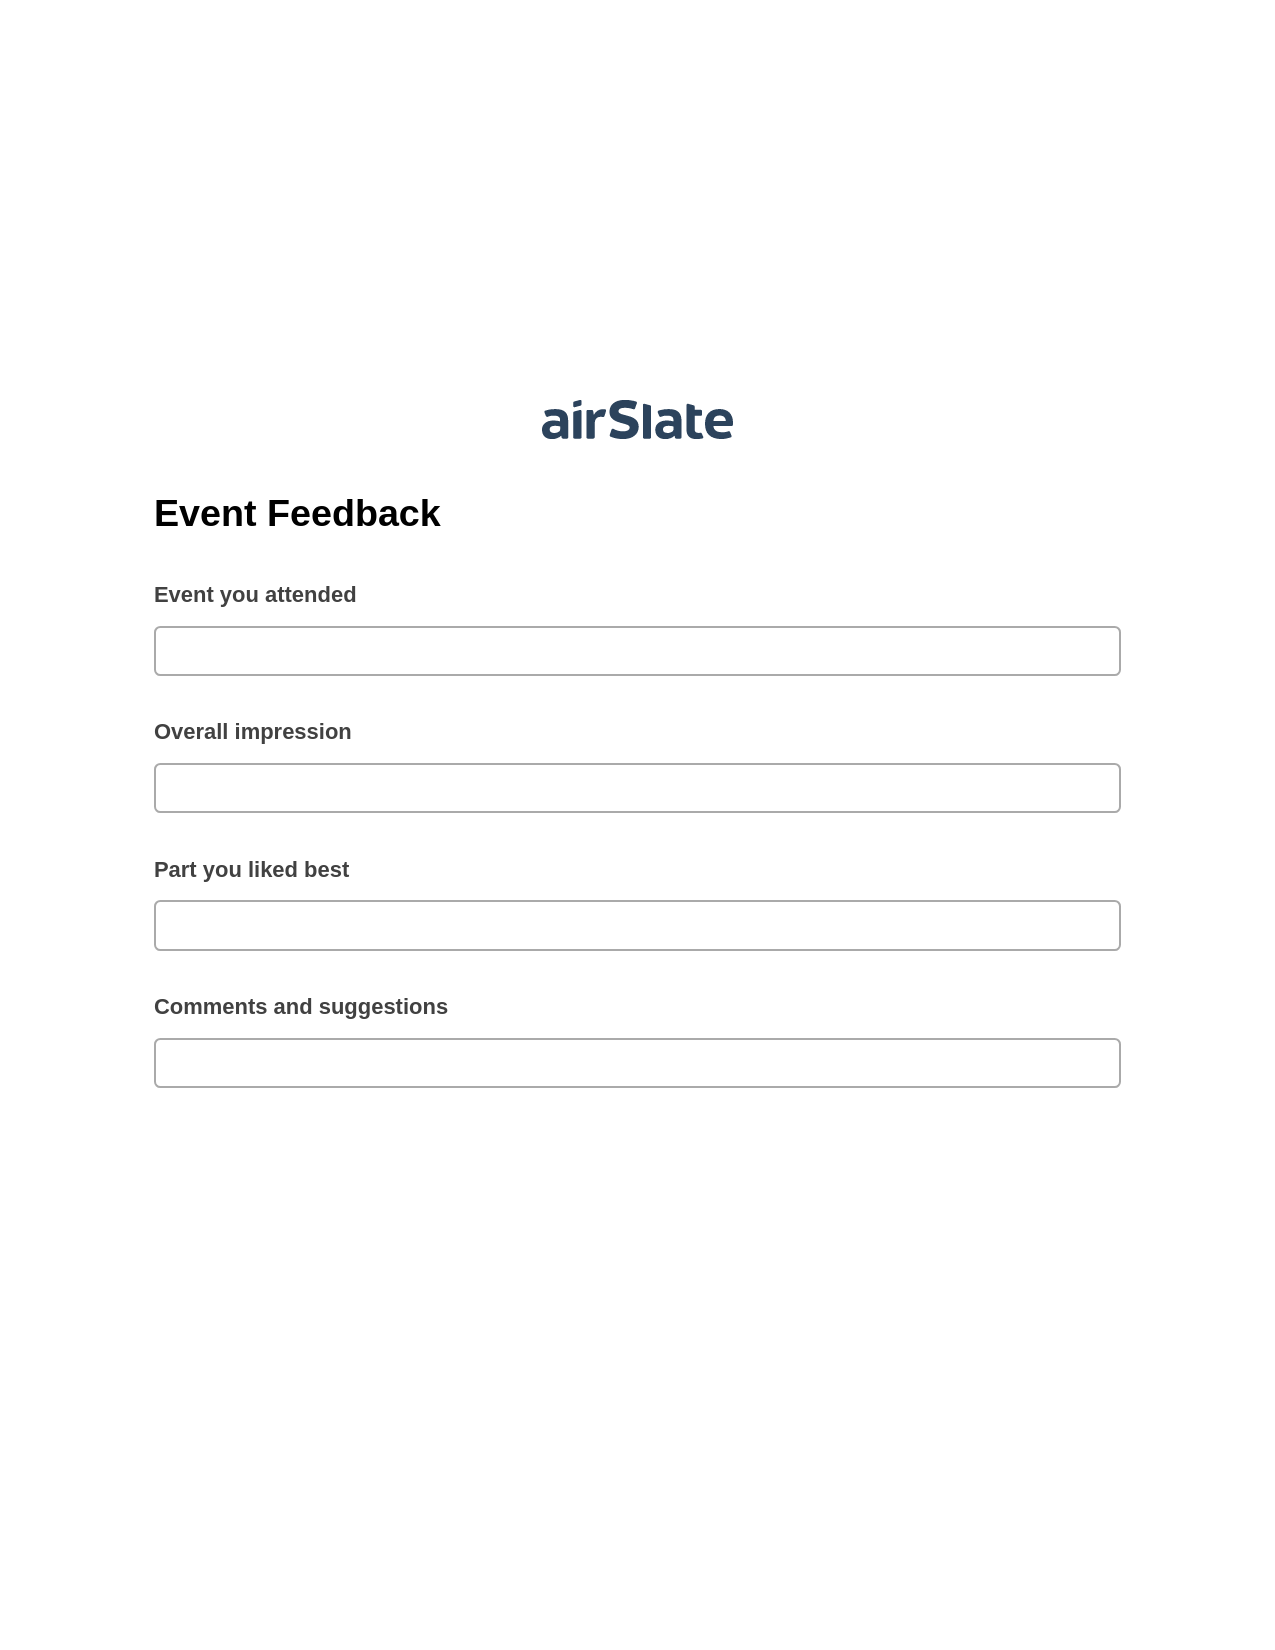 Event Feedback Pre-fill Dropdown from Airtable, Google Sheet Two-Way Binding Bot, OneDrive Bot